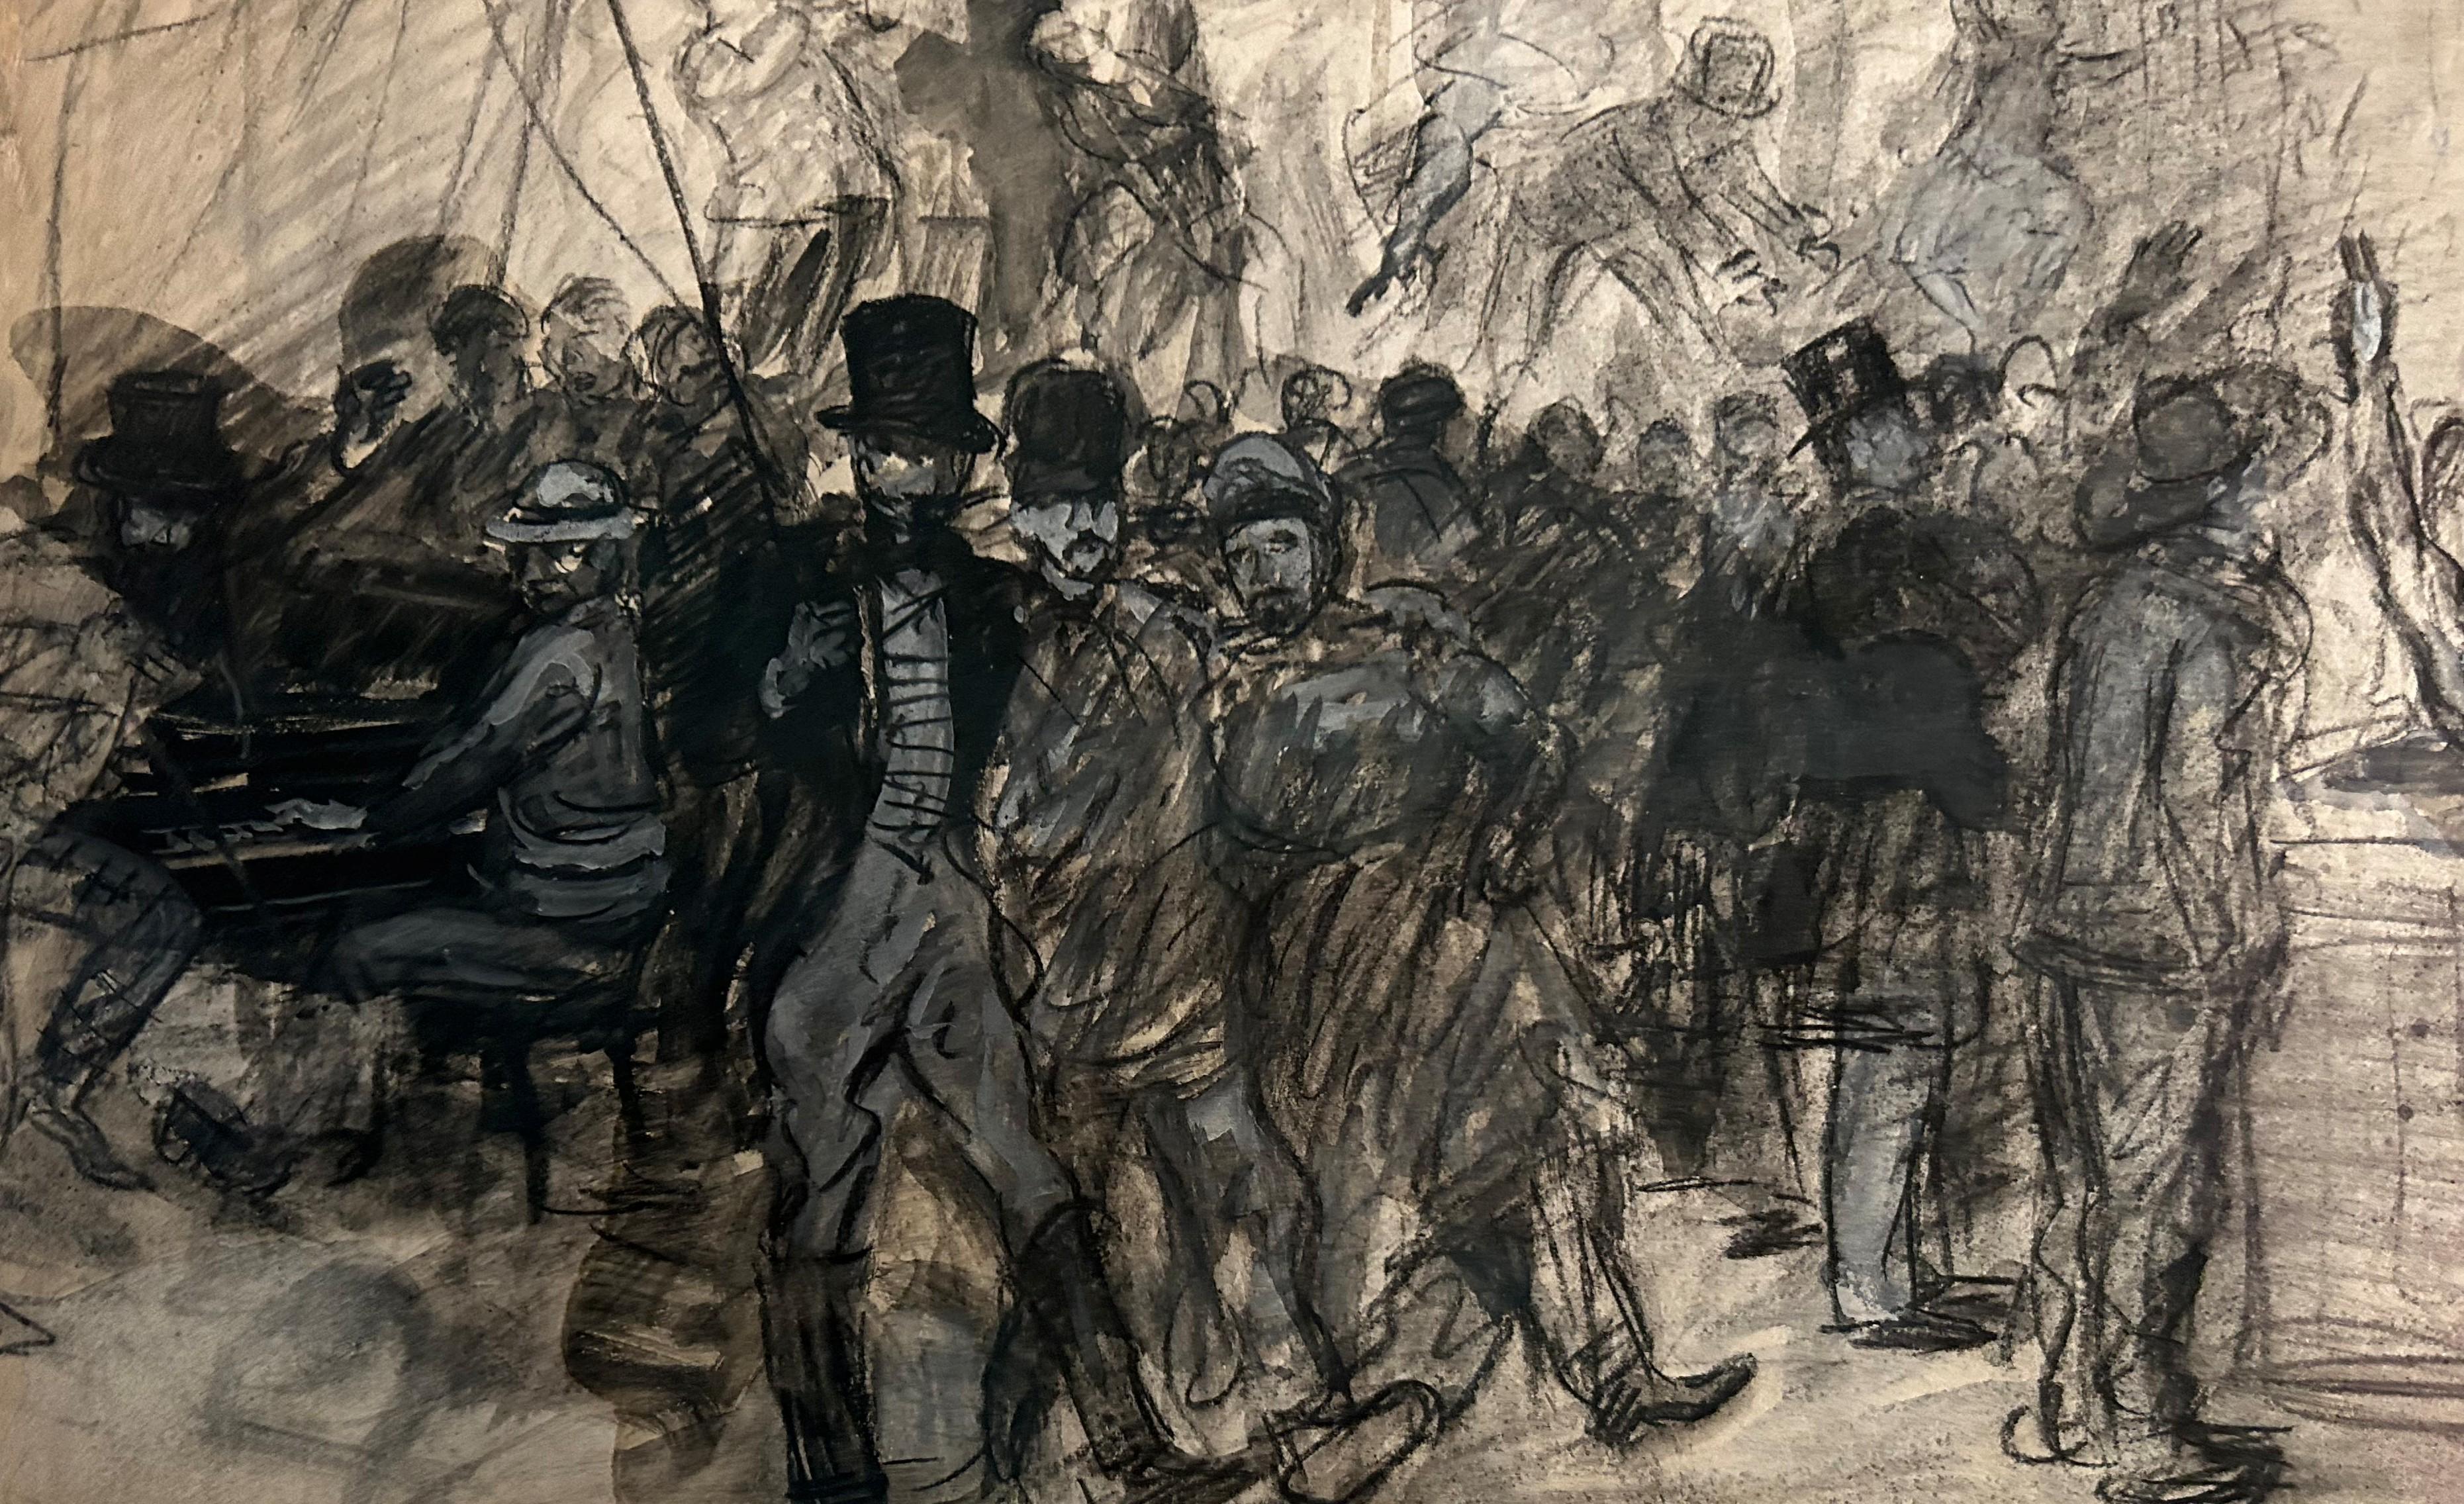 William Glackens
Street Fair, circa 1905
Pencil, ink and gouache on paper
10 x 14 inches

Provenance:
The artist
Kraushaar Galleries, New York
Estate of Mary Erlanger

Born in Philadelphia, William Glackens became an Impressionist painter who